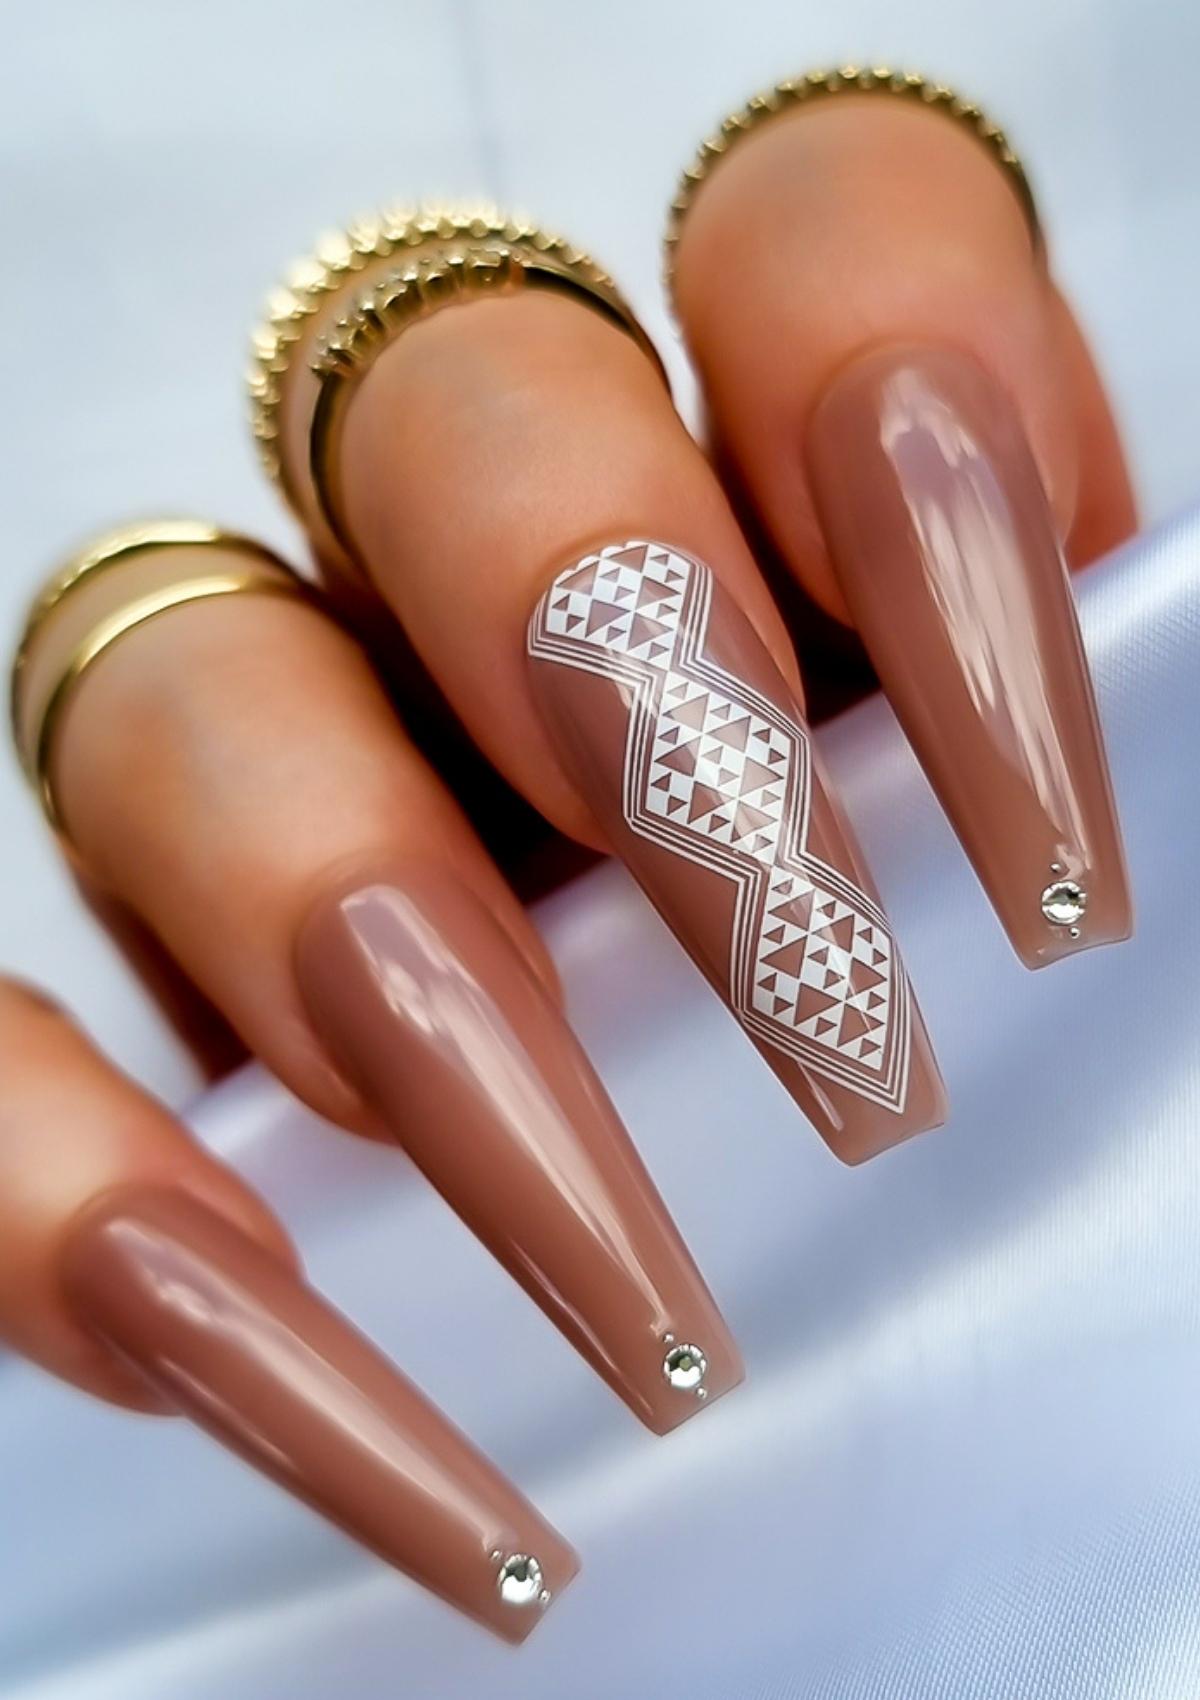 Long coffin shaped nails in light brown with white Maori nail art on the middle finger. Nail art design in Aonui pattern by Adrienne Whitewood.  